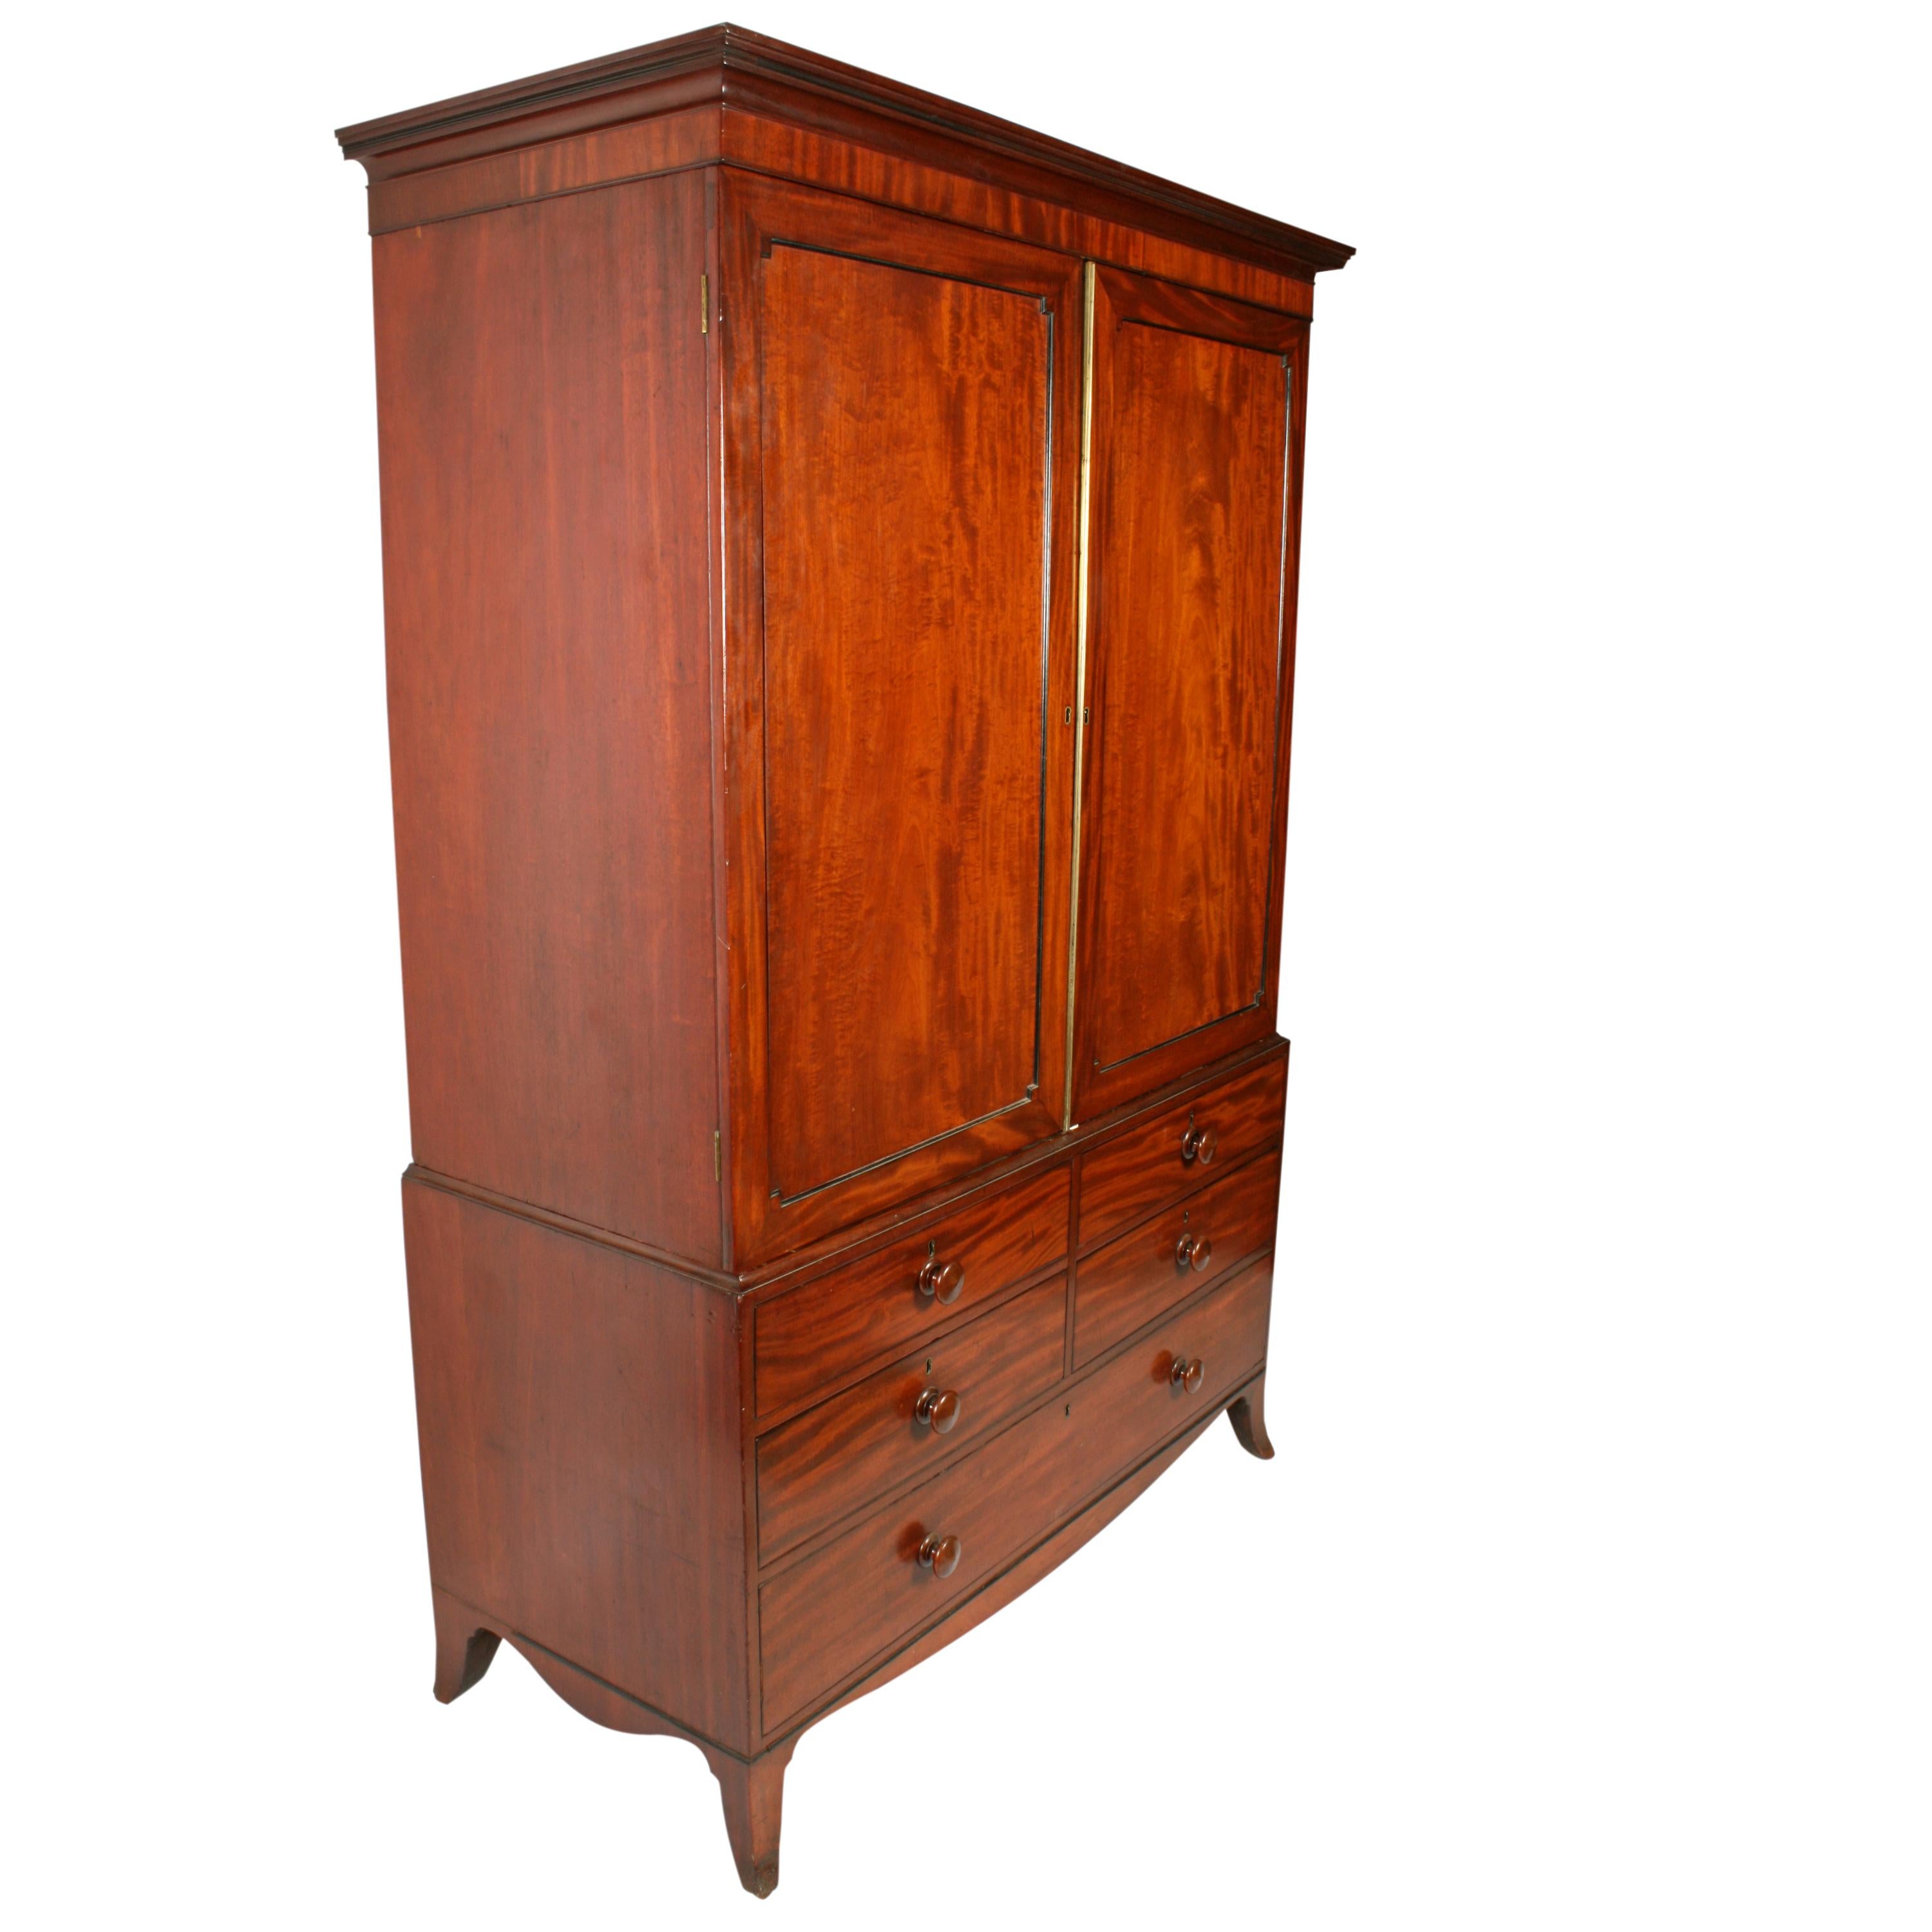 An early 19th century Georgian mahogany tray wardrobe with a drawer base.

The top has a pair of doors with recessed panels that are ebony edged and have a reeded gilt brass bead where the doors meet.

The inside holds five sliding trays that